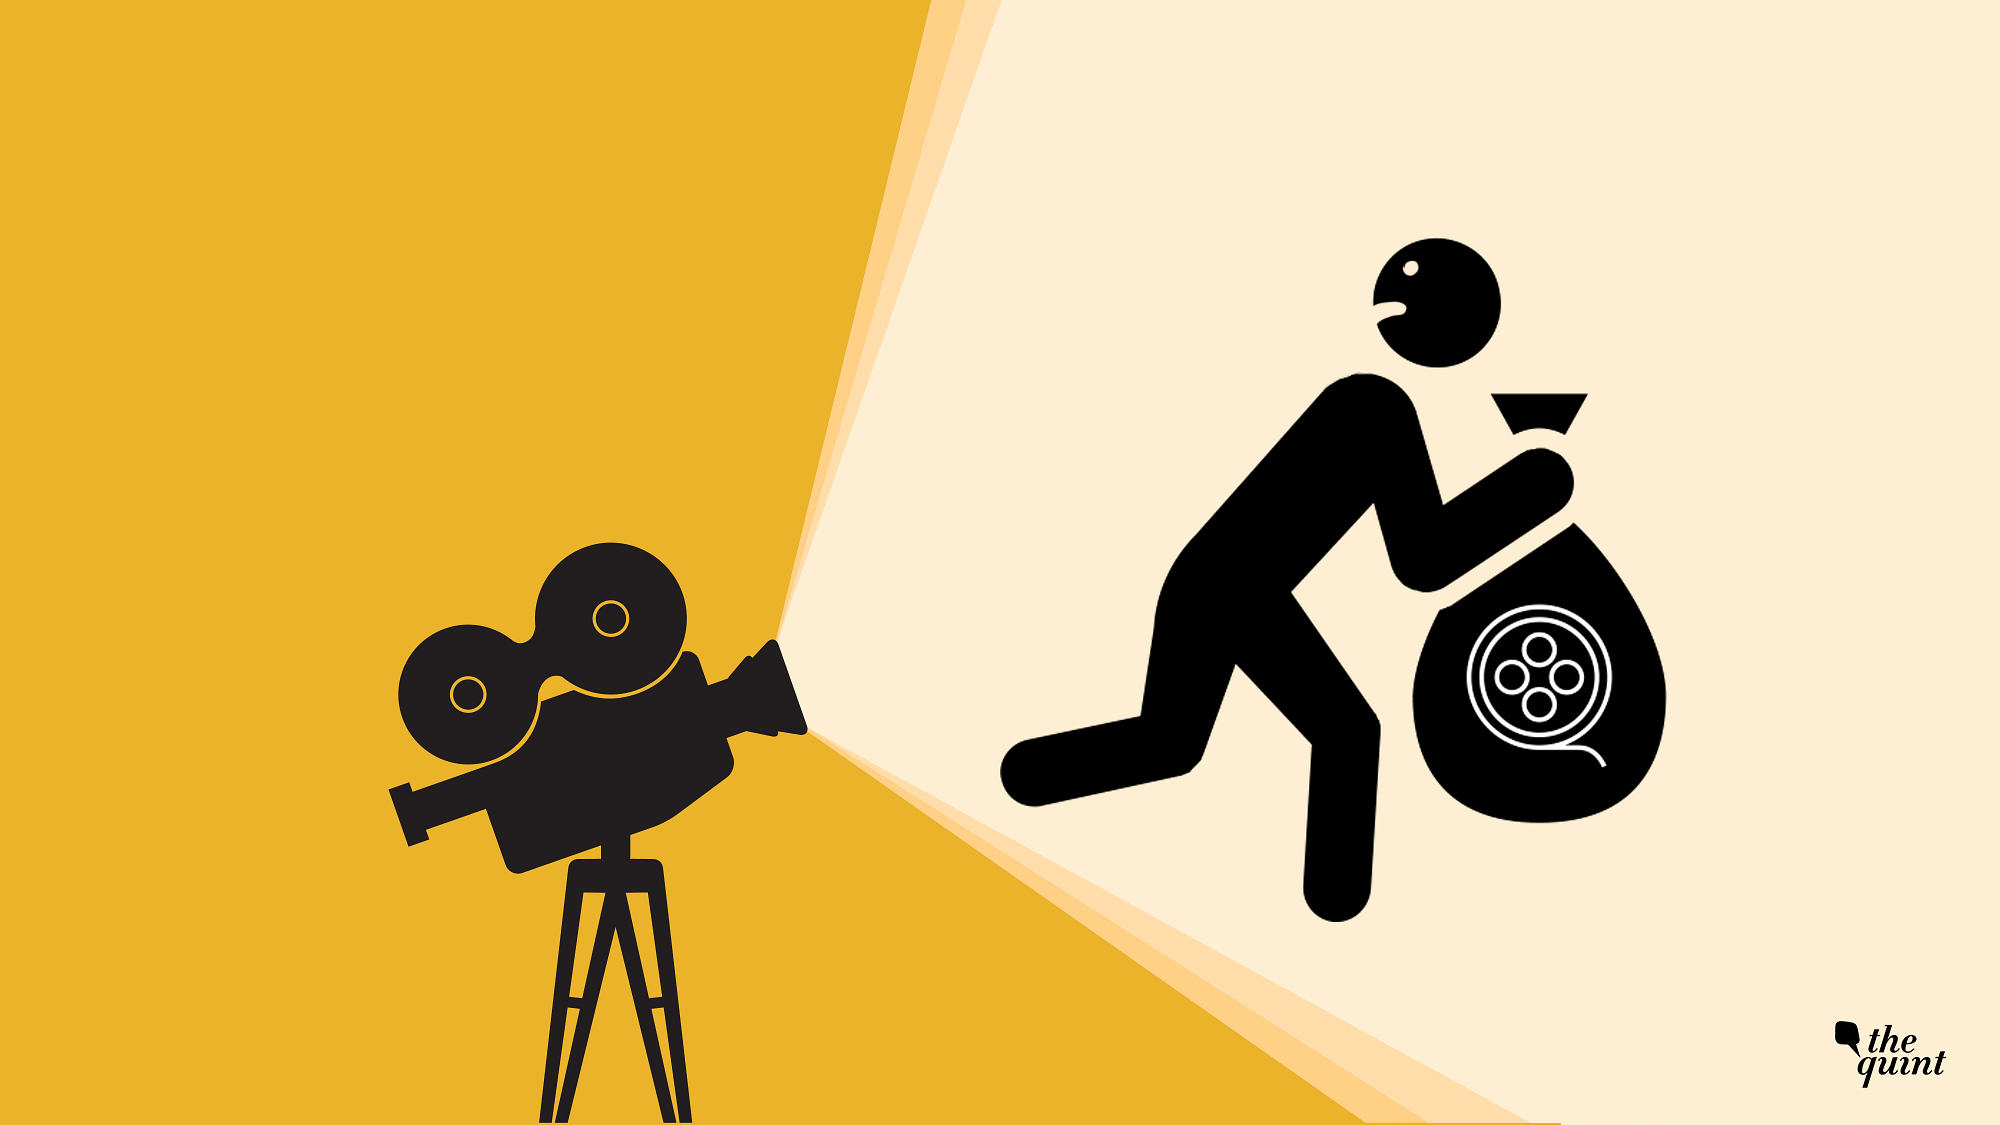 The Cabinet has approved amendments to the Cinematograph Act to penalize film piracy.